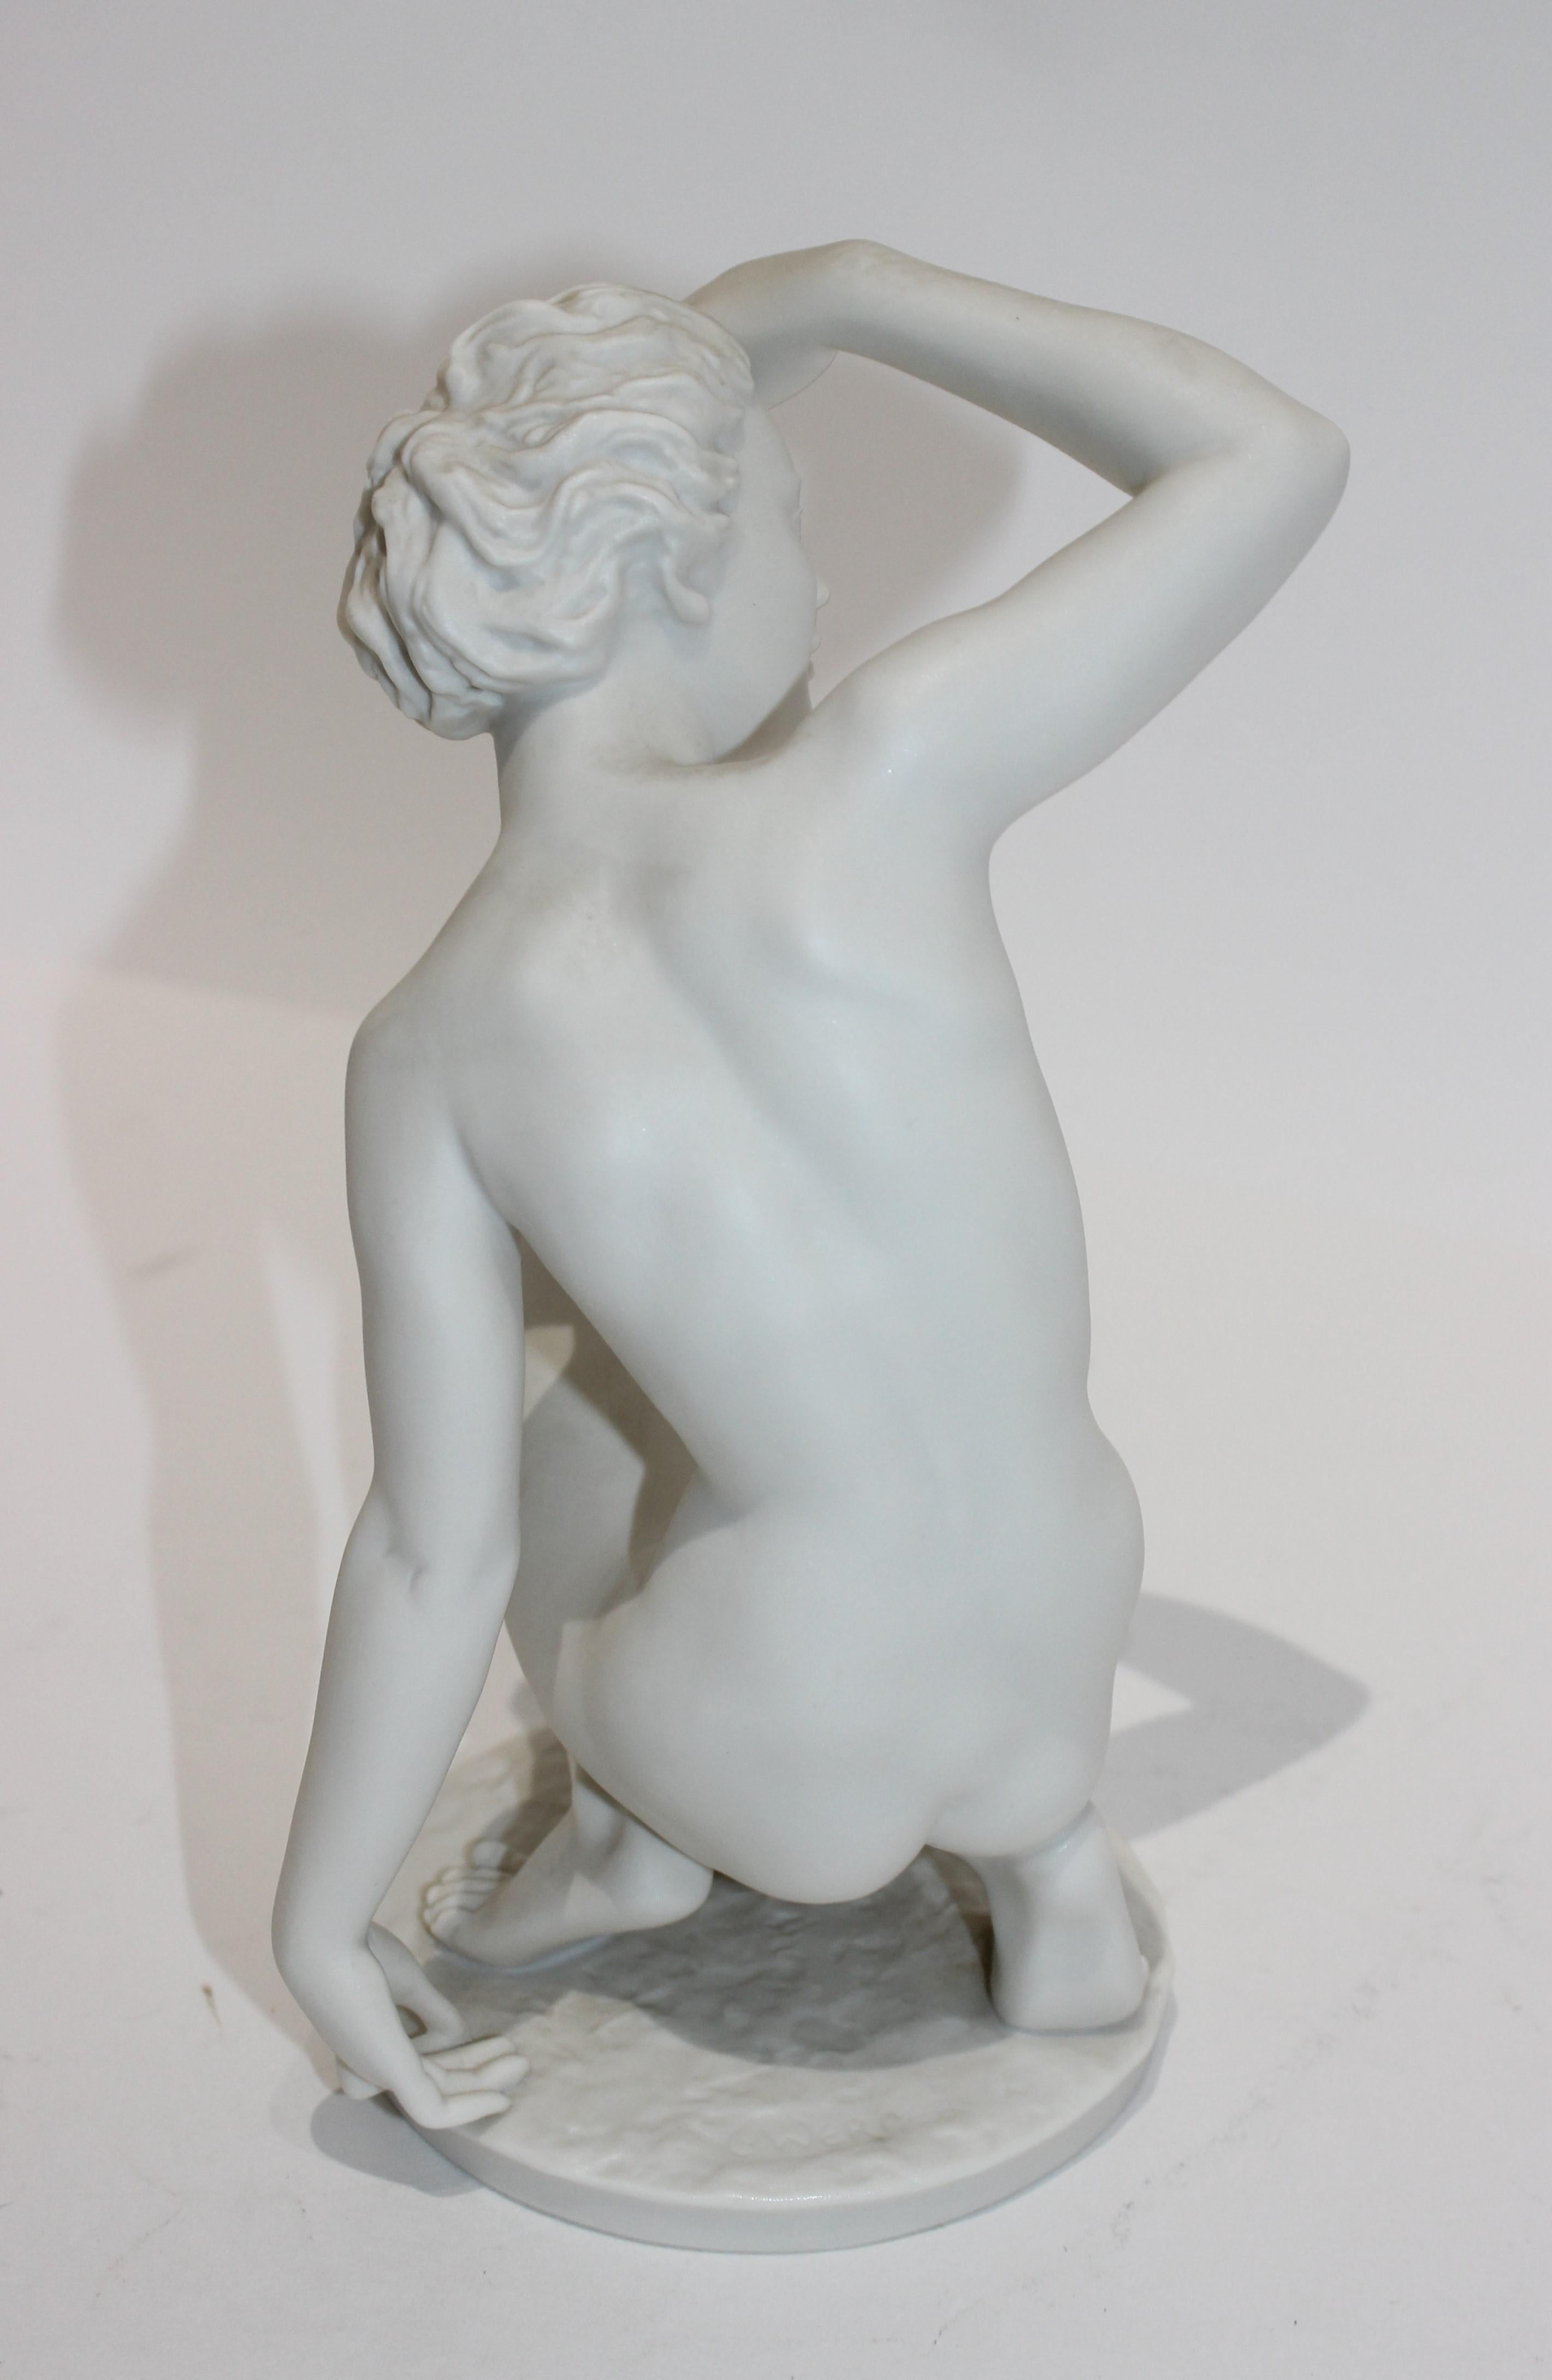 Bisque Porcelain Figure of a Nude Female  In Good Condition For Sale In West Palm Beach, FL